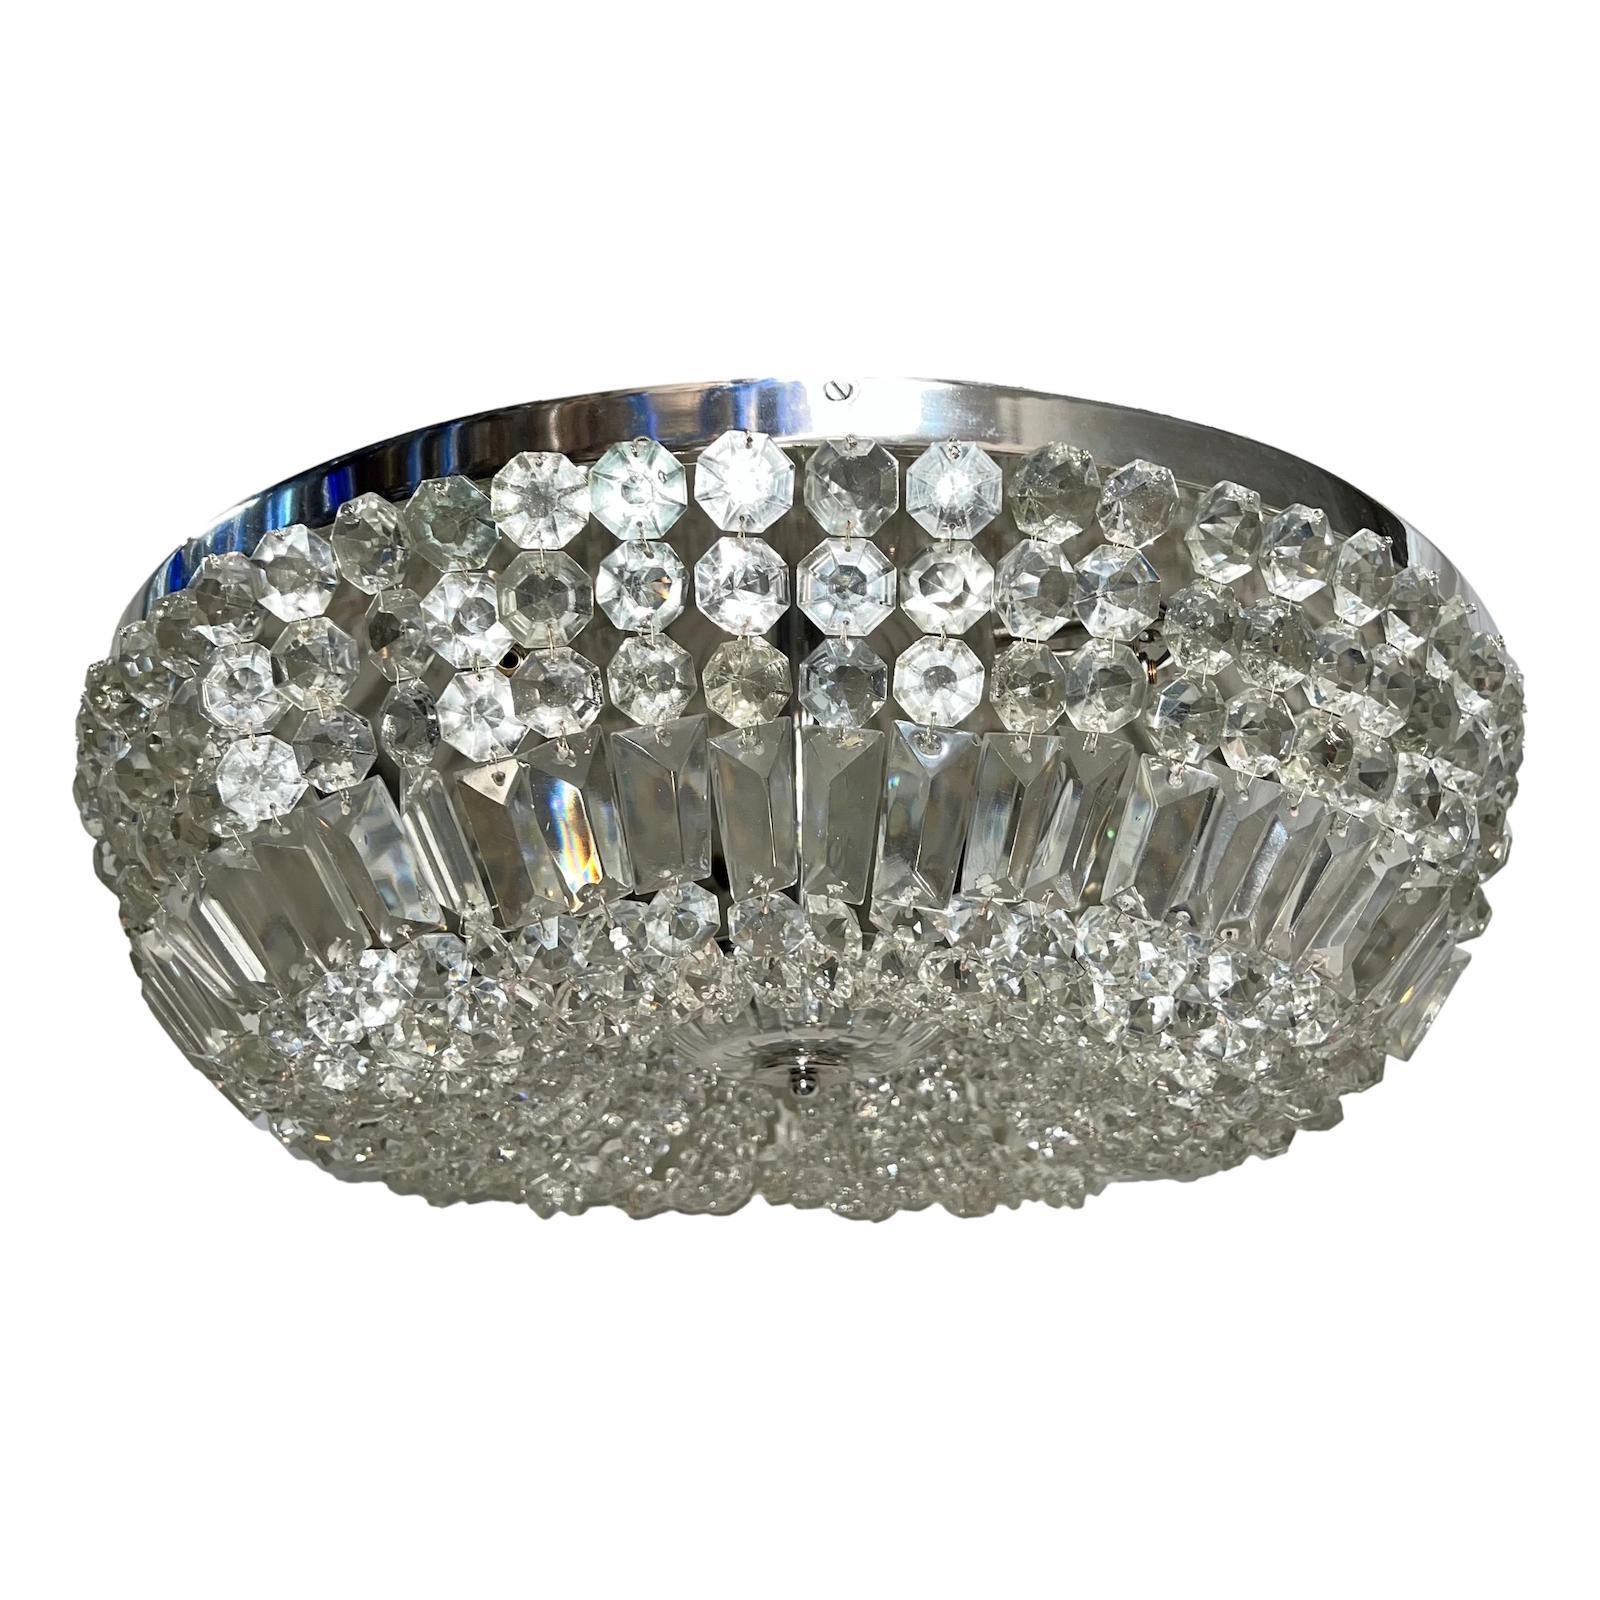 A set of four nickel-plated Art Deco crystal French flush mounted light fixtures with six lights each. Sold individually.

Measurements:
Diameter: 23